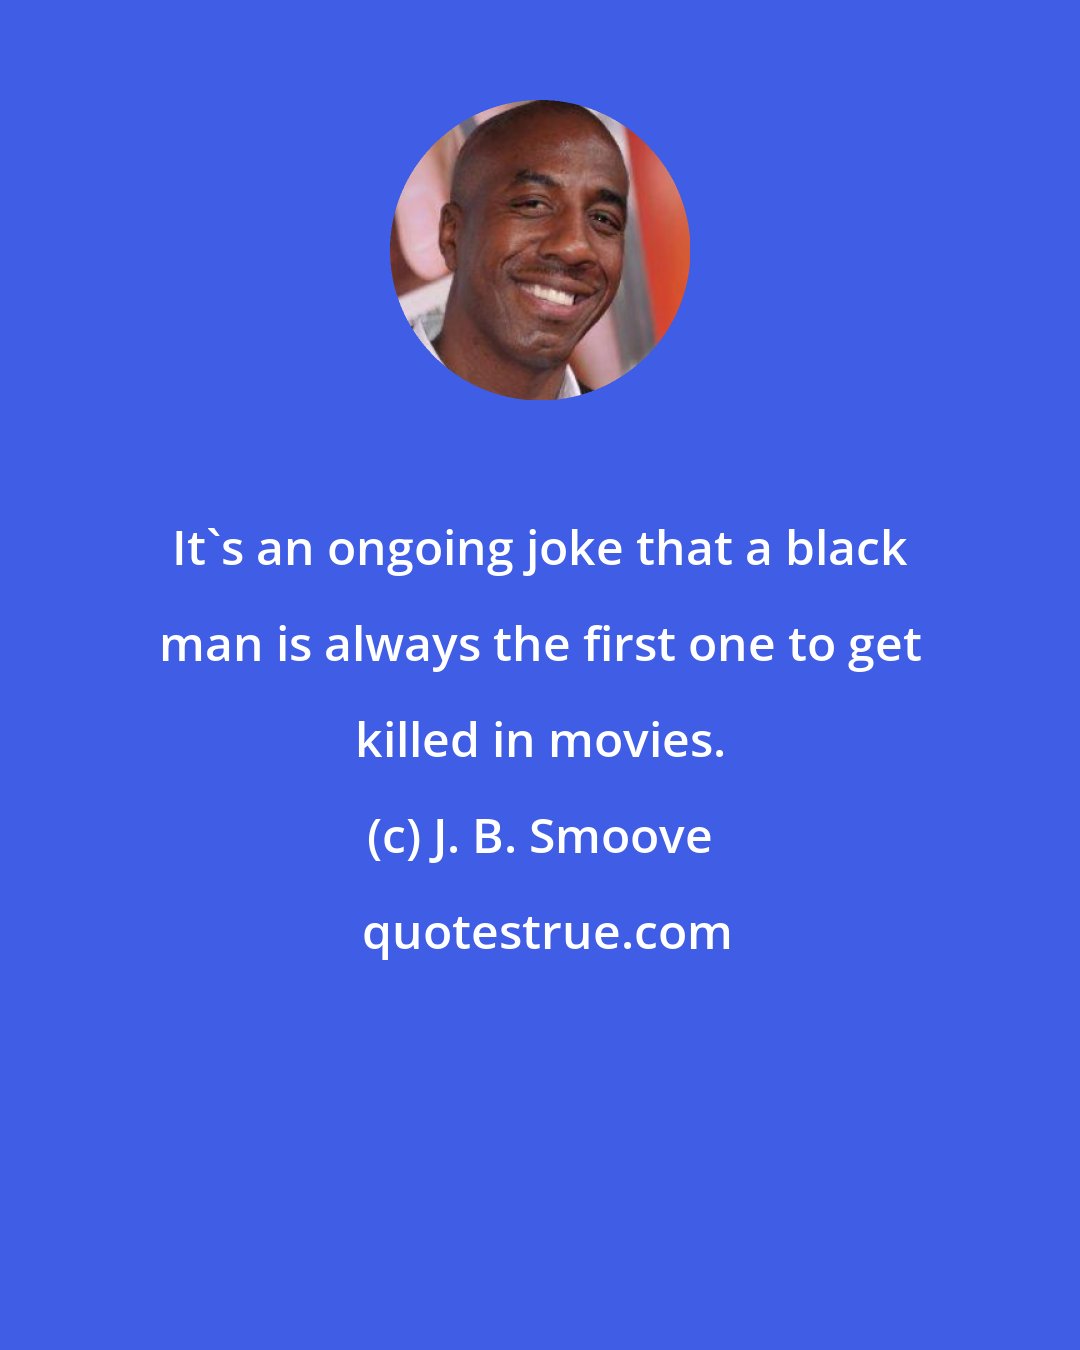 J. B. Smoove: It's an ongoing joke that a black man is always the first one to get killed in movies.